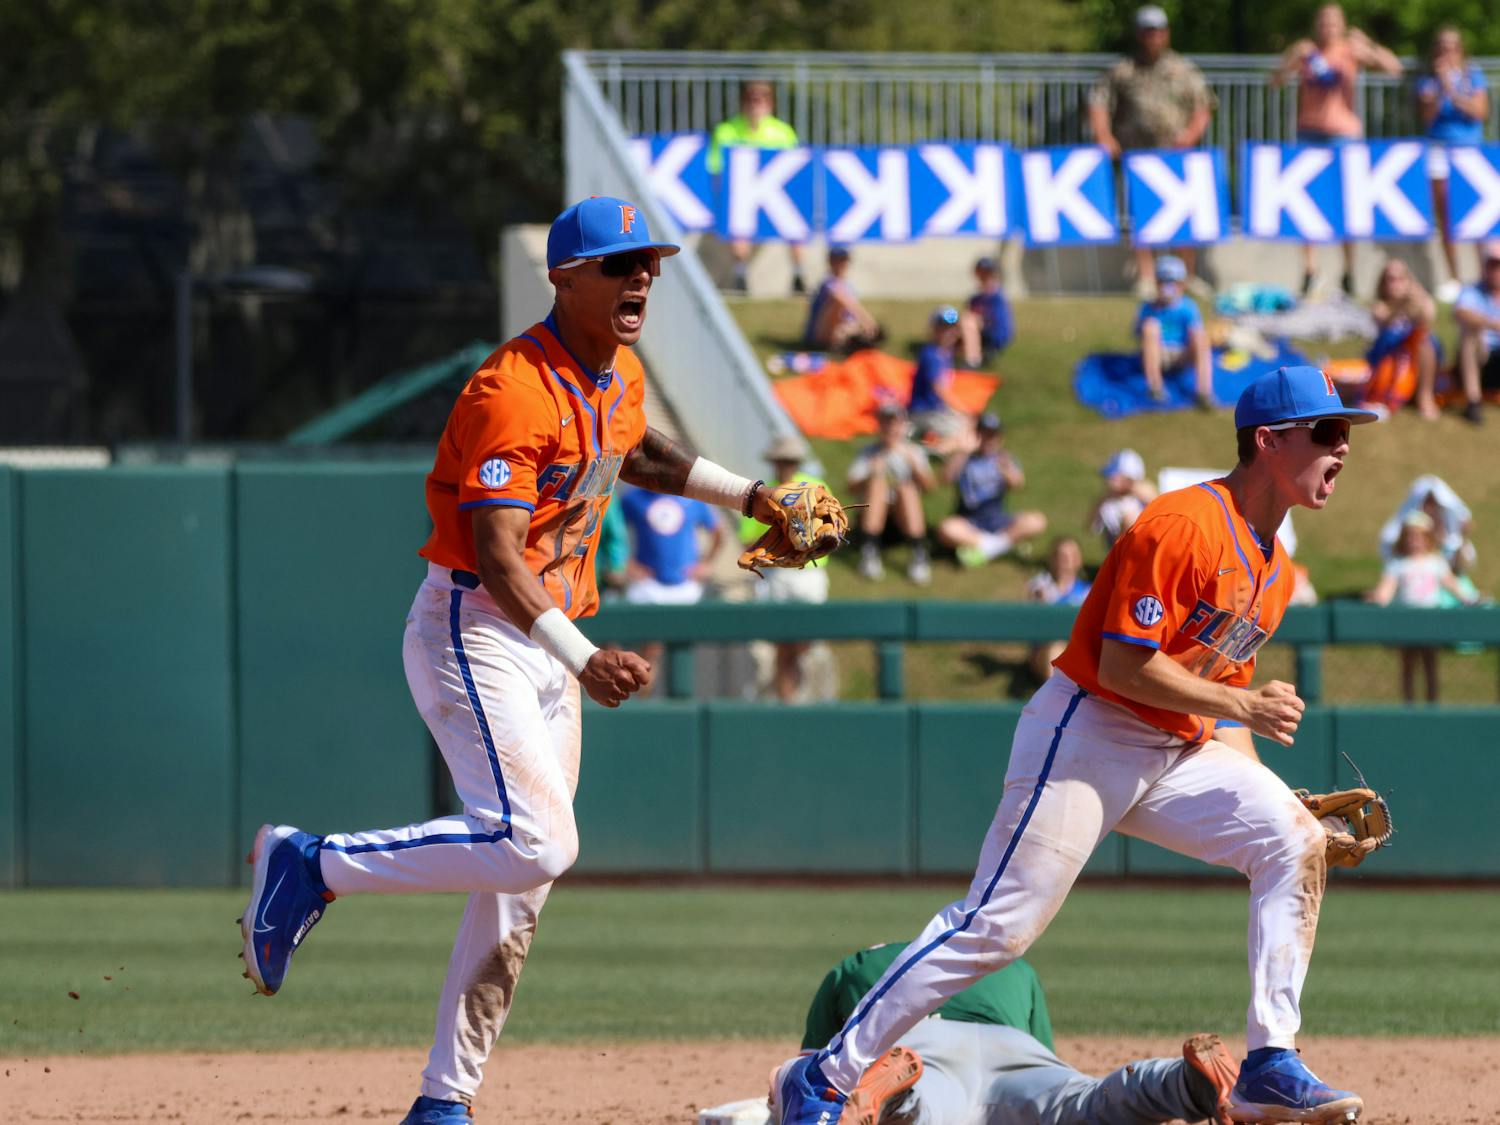 Florida infielders Josh Rivera and Cade Kurland celebrate an out in No. 6 Florida’s 14-4 mercy-rule win against the No. 22 Miami Hurricanes at Condron Ballpark Sunday, March 5, 2023